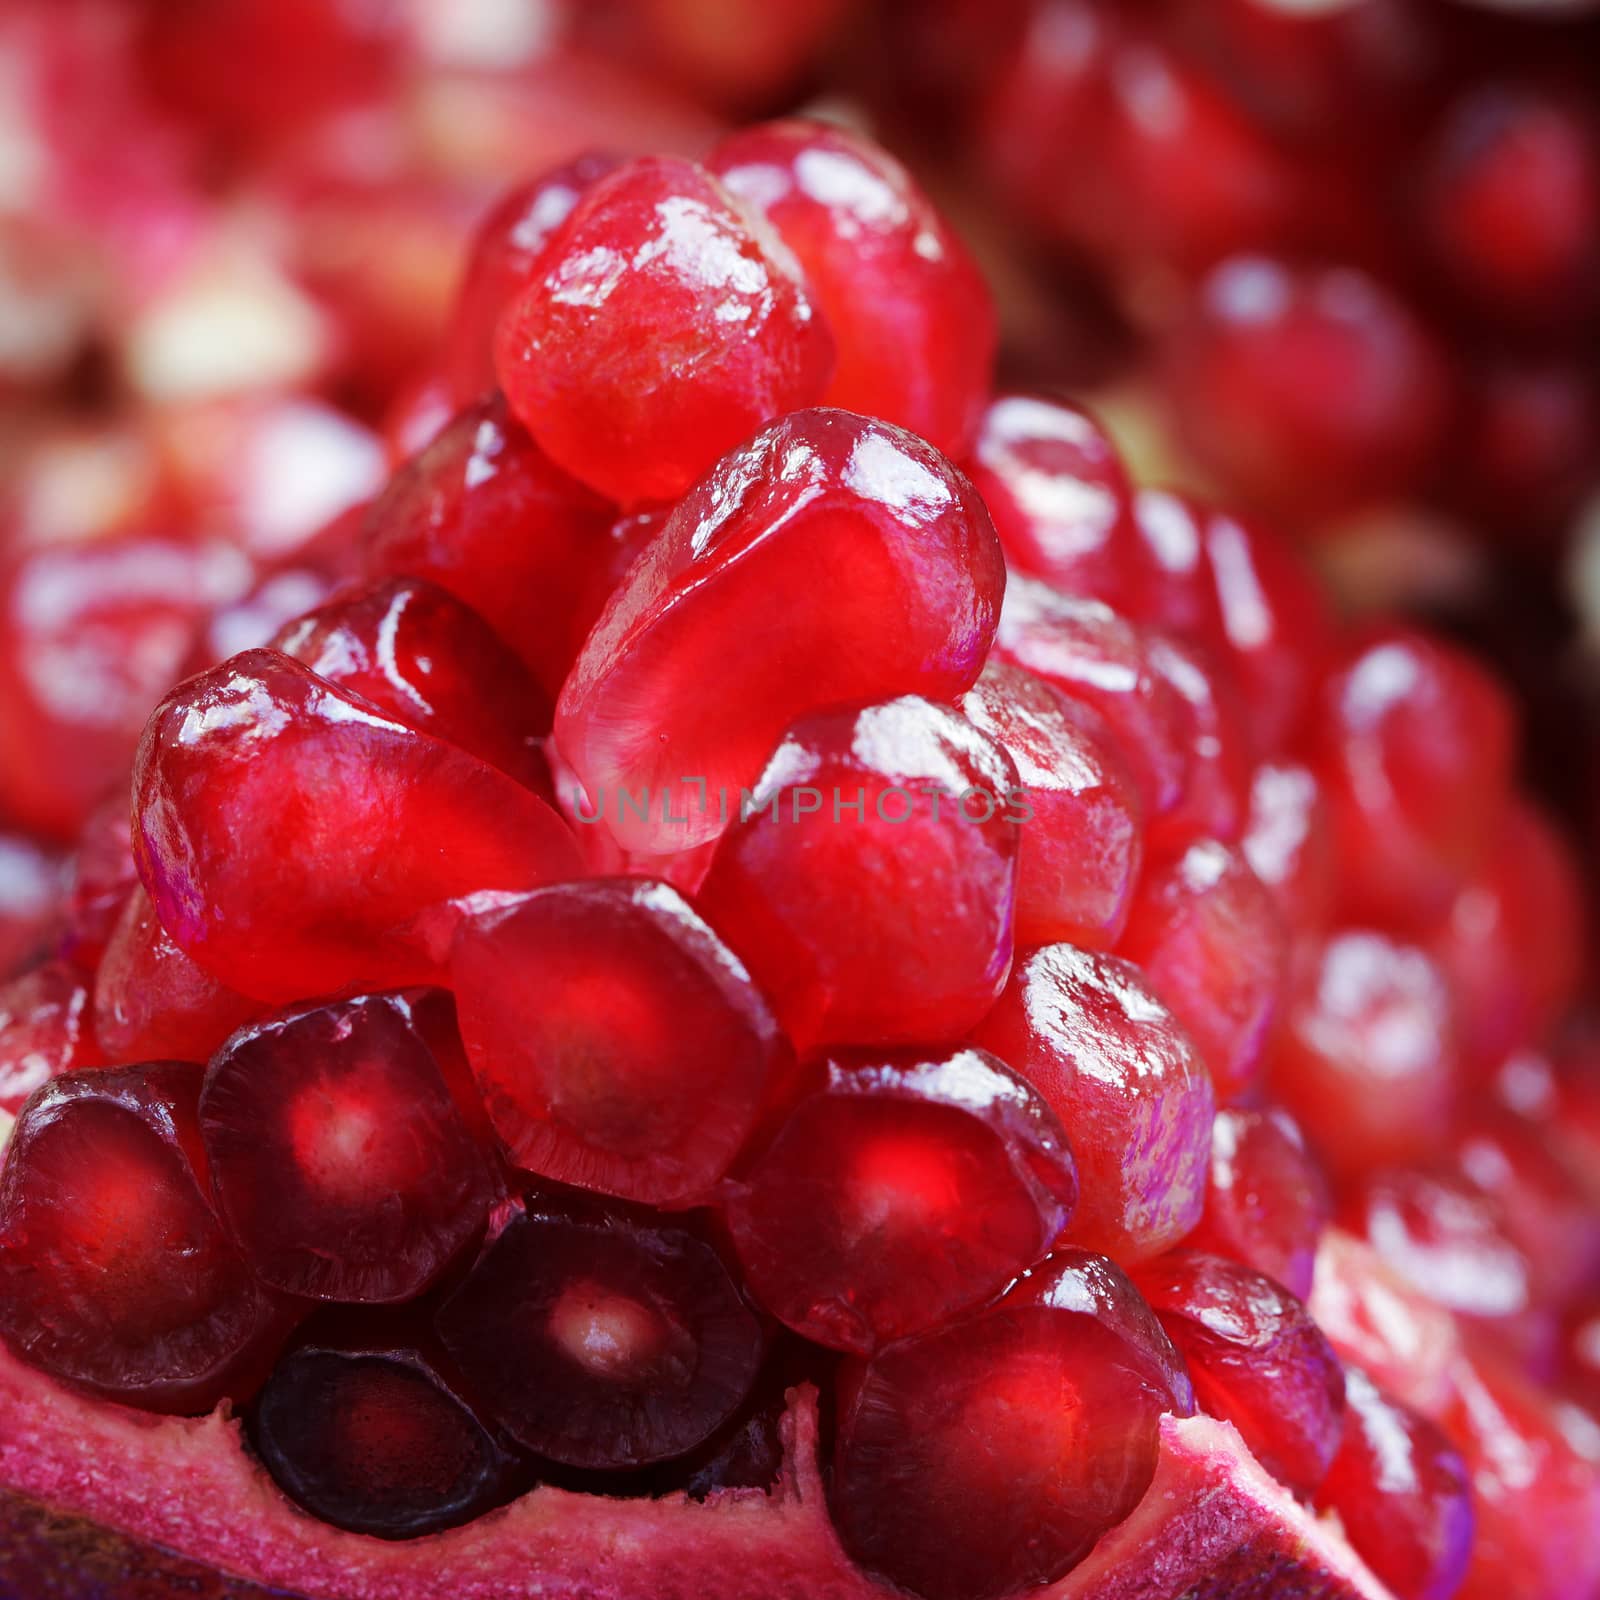 Pomegranate red fruit beautiful close up photo by Voinakh